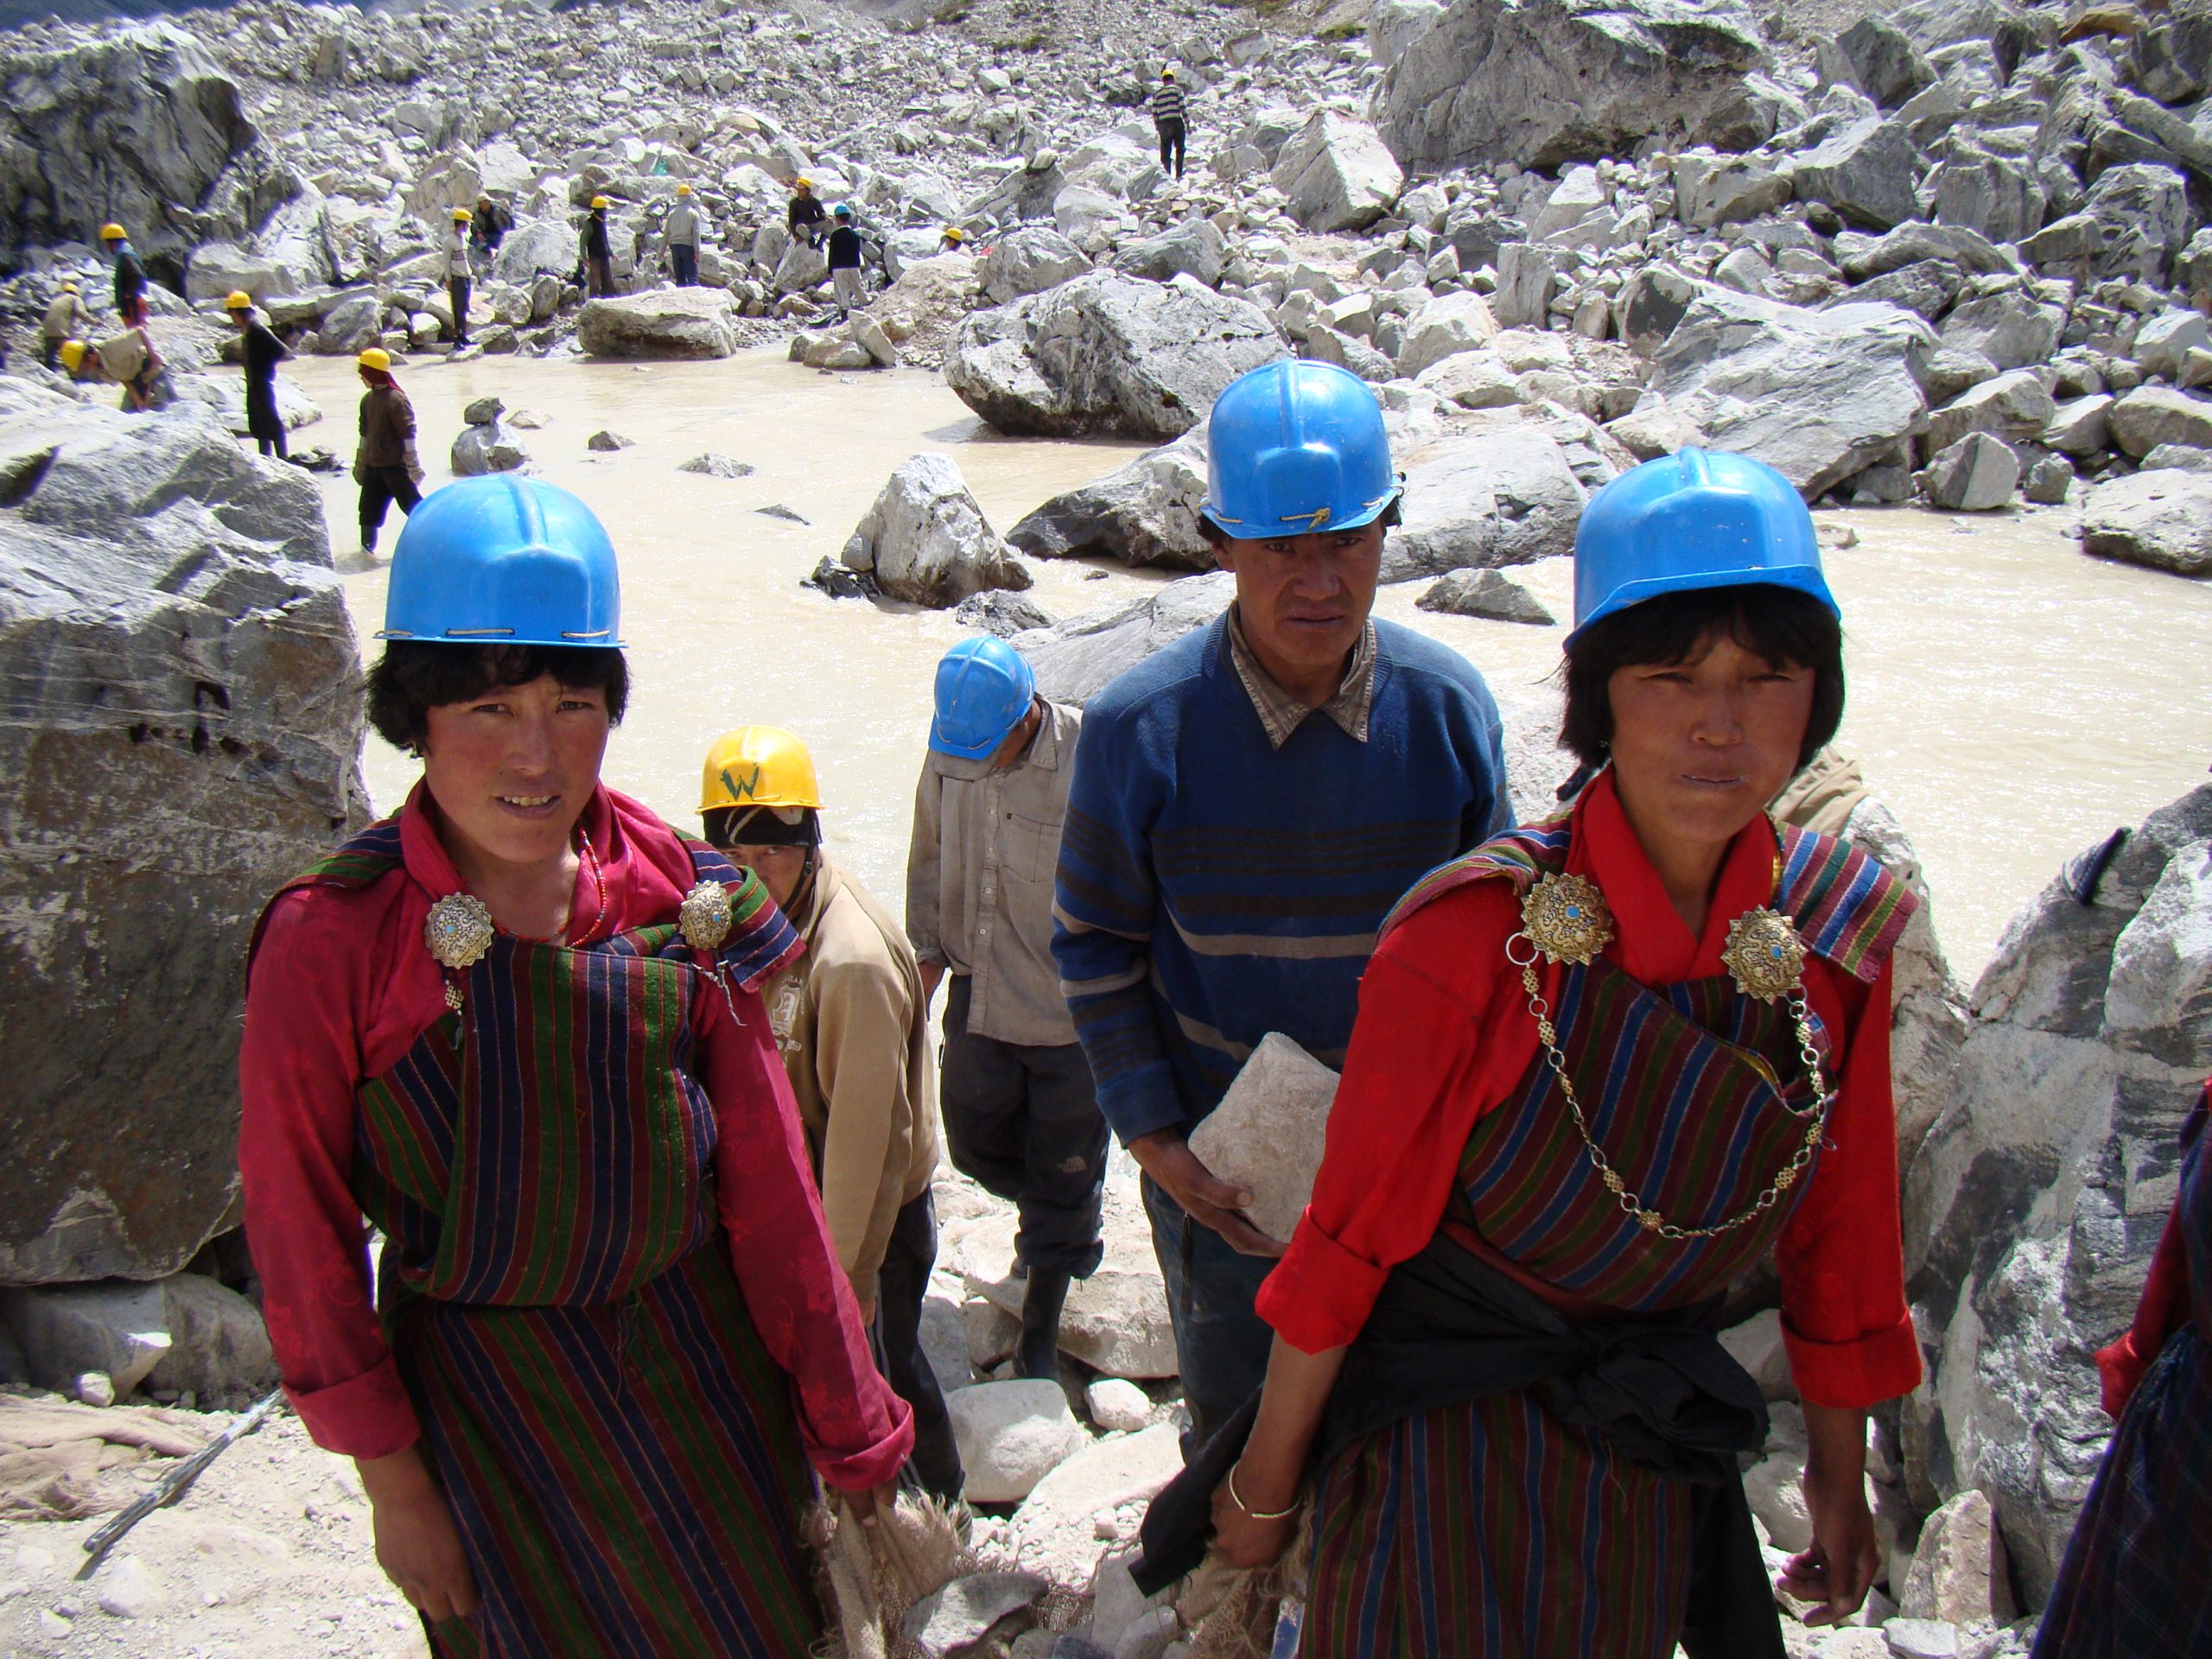 Workers from the United Nations Development Programme in Bhutan are trying to reduce the risk of floods around Thorthormi lake (Image: United Nations Development Programme)